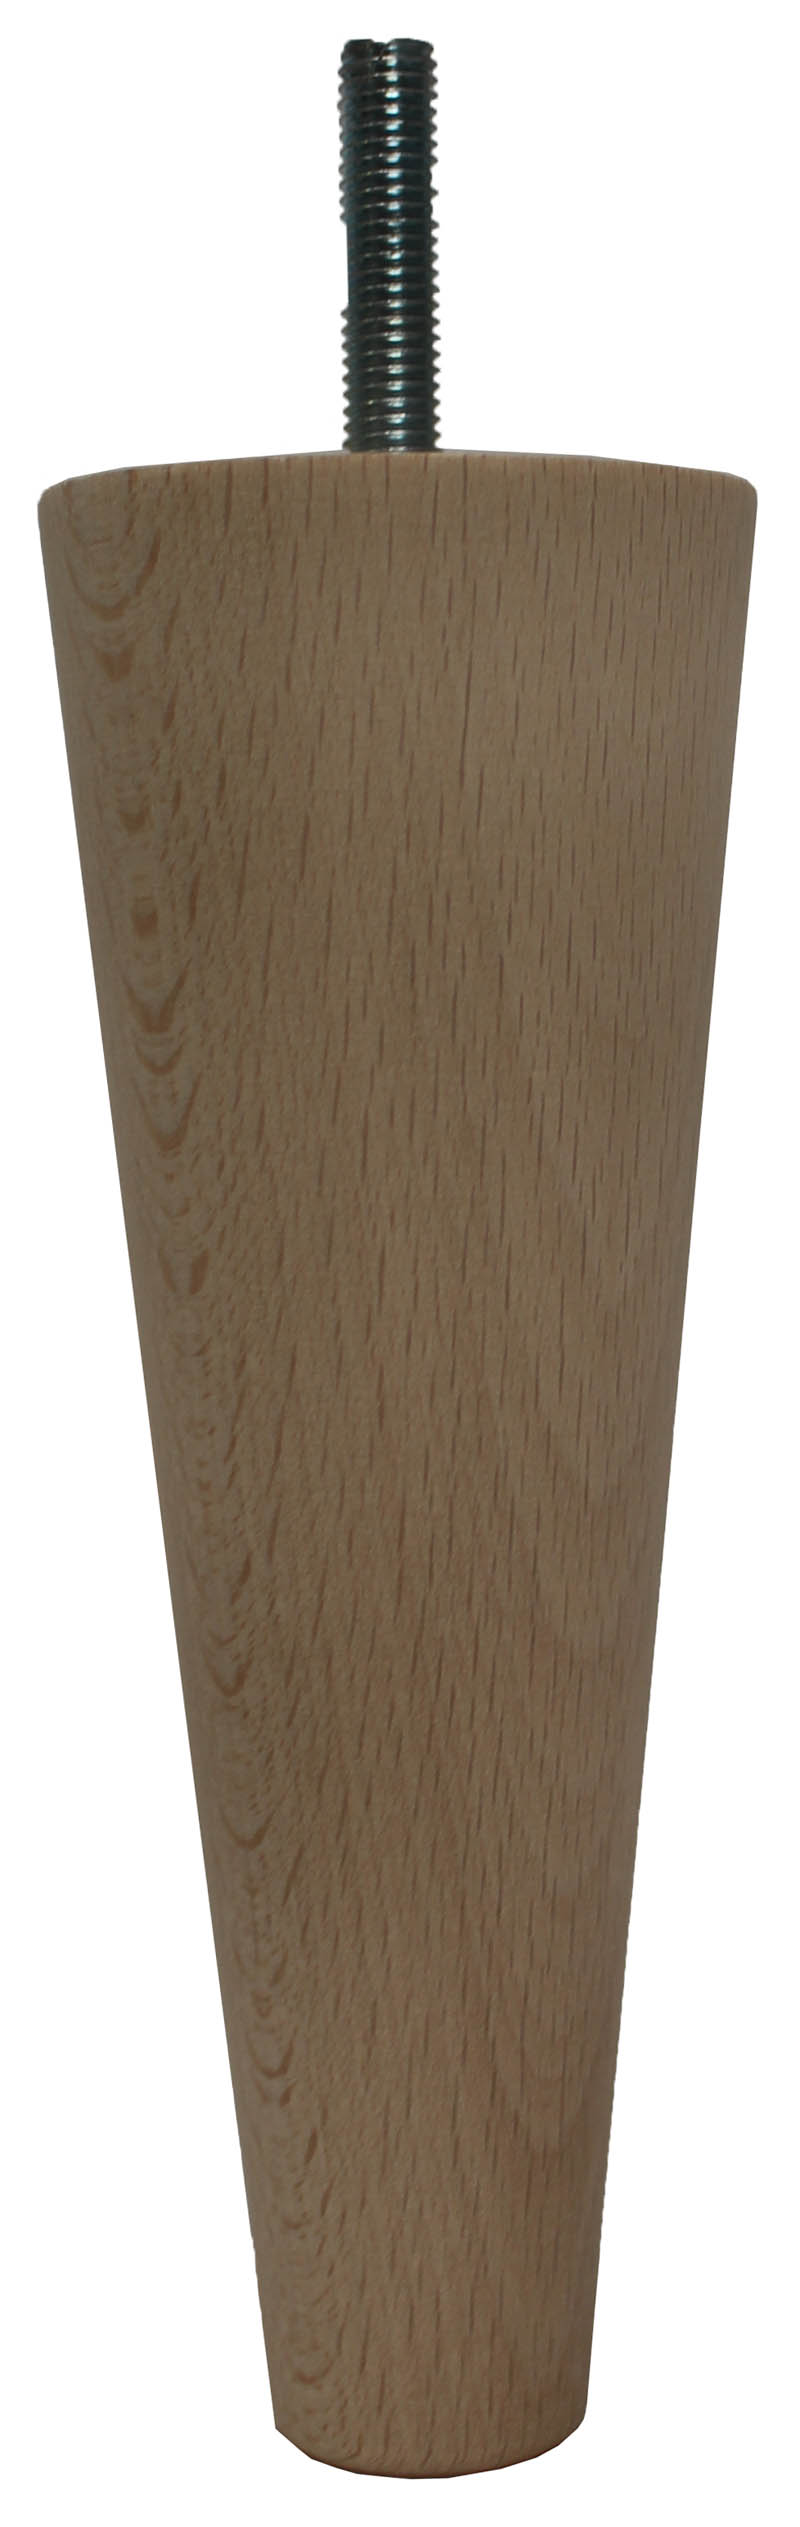 Colleen Tapered Furniture Legs - Raw Finish - Set of 4